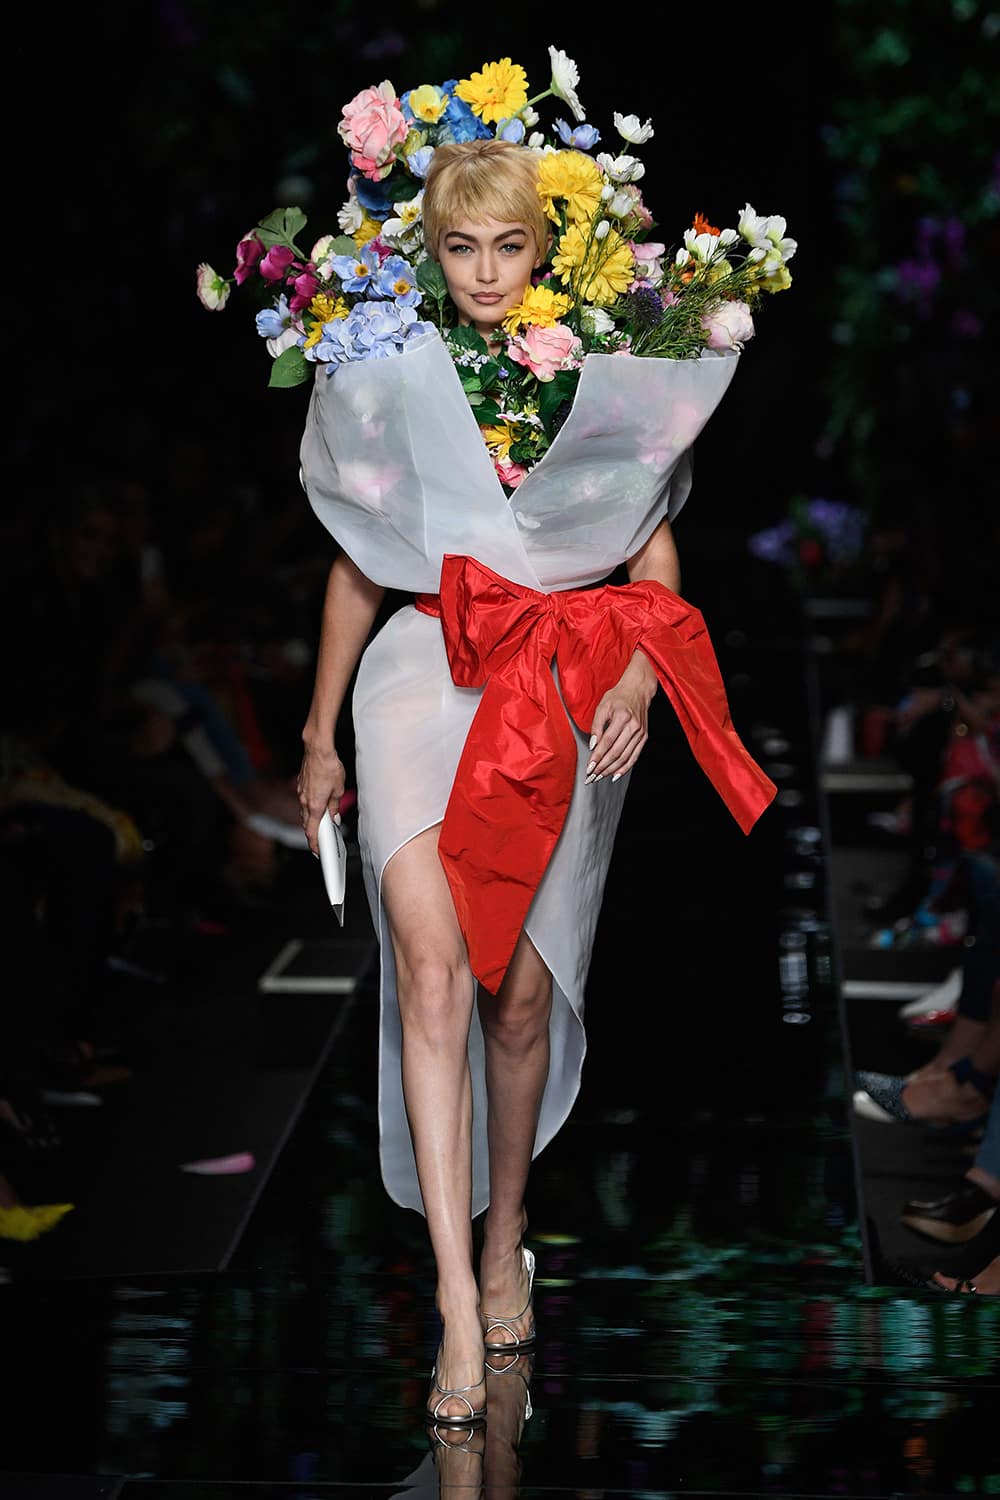 Flowers in fashion